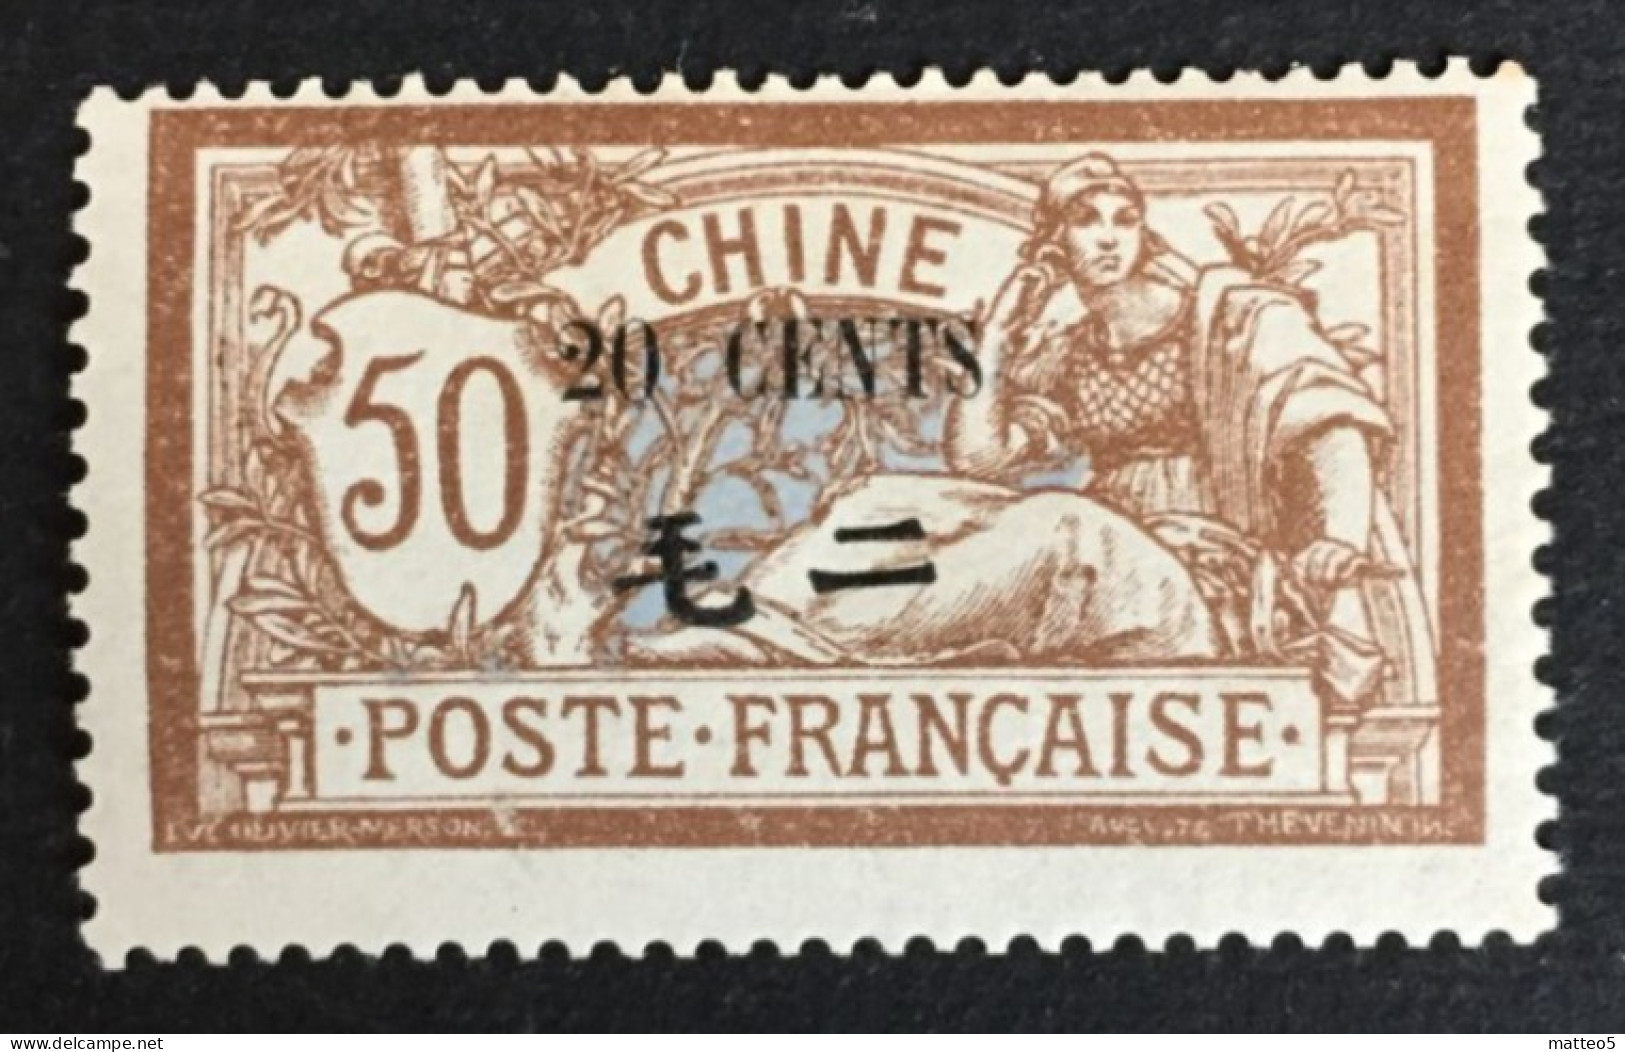 1907 - China French Post Office - Type Merson - Definitives Surcharged New Valve  - Unused - Nuevos